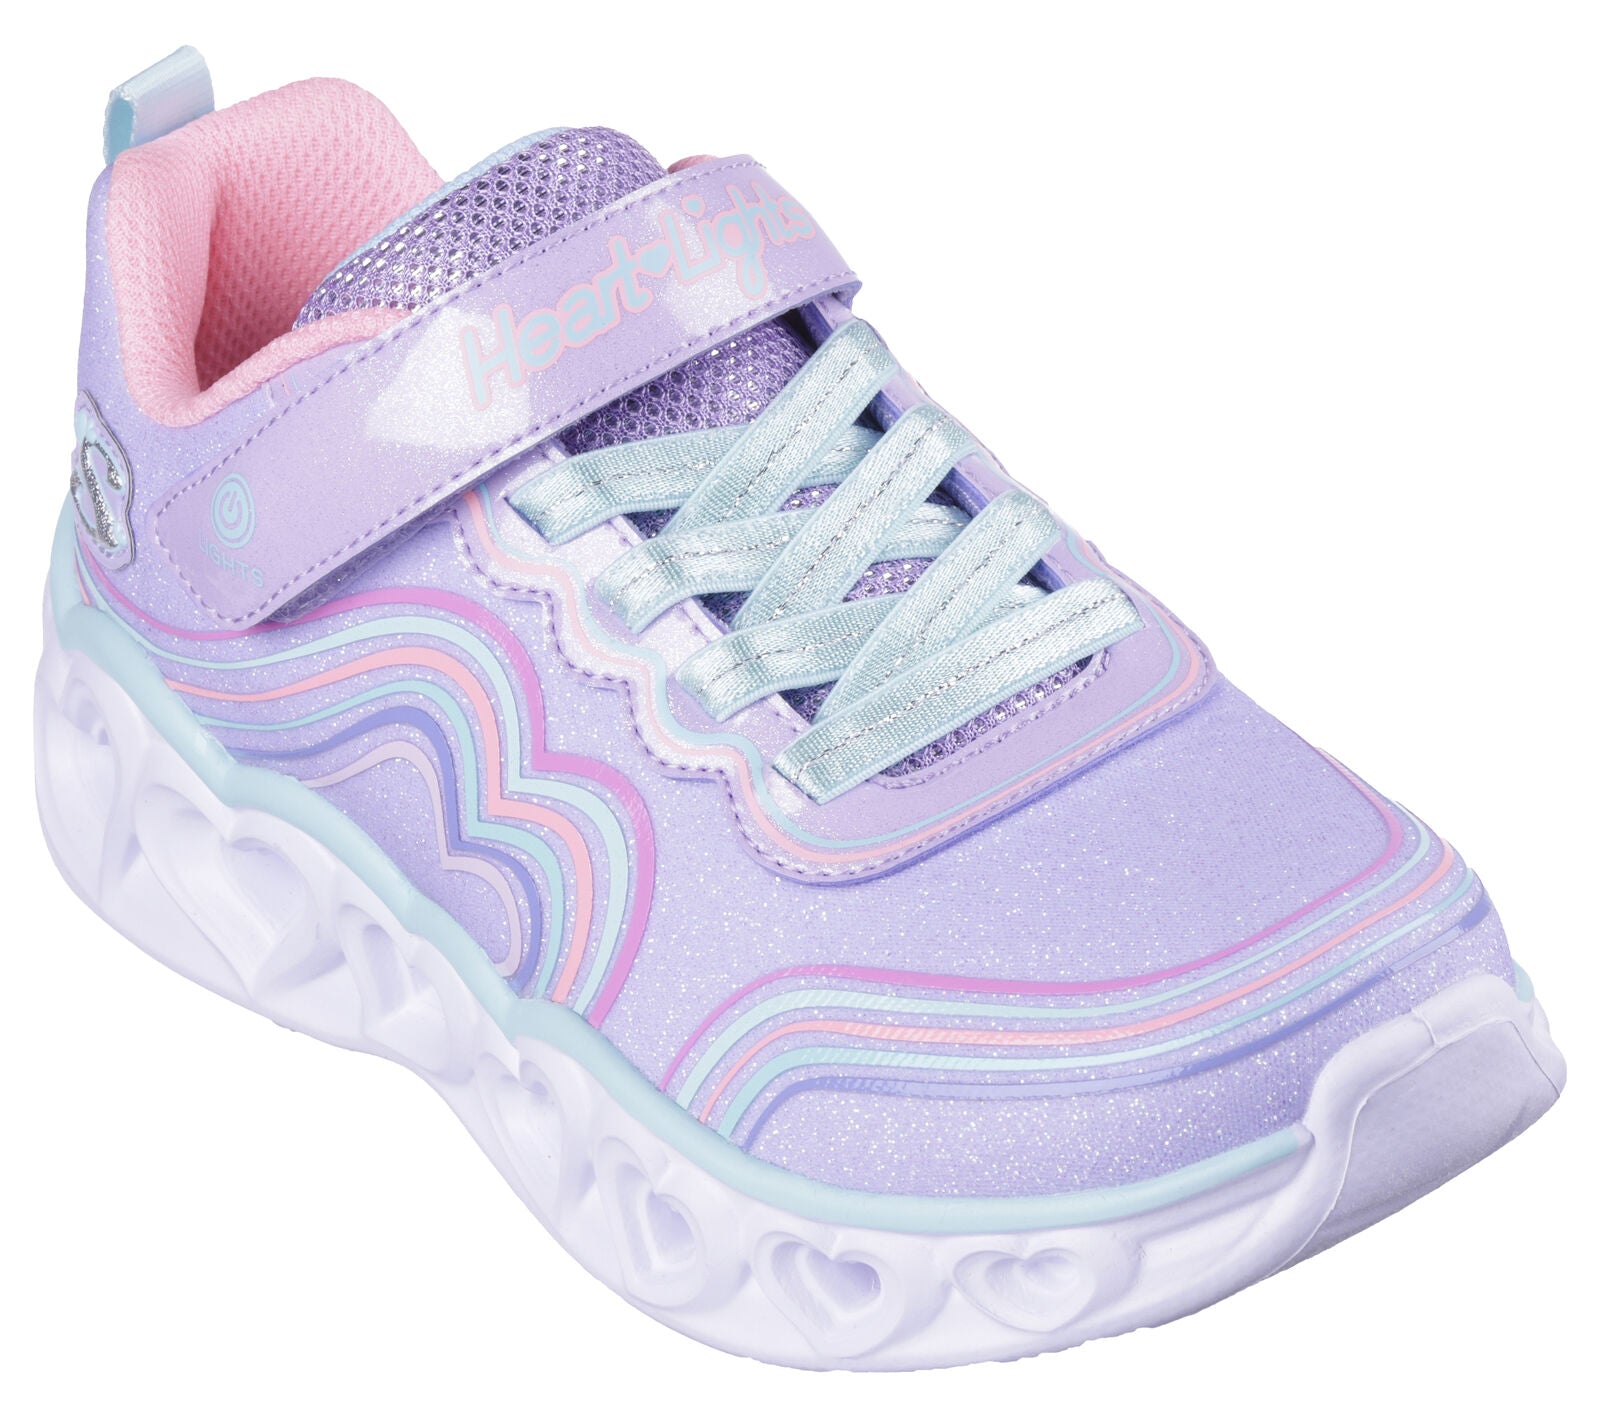 Skechers  S Lights Retro Hearts in lavender with a multi coloured swirl pattern round the upper. Lights along the  heart sole unit and the Skechers branding. Velcro fastening with flat stretch bungee laces. Angled view.